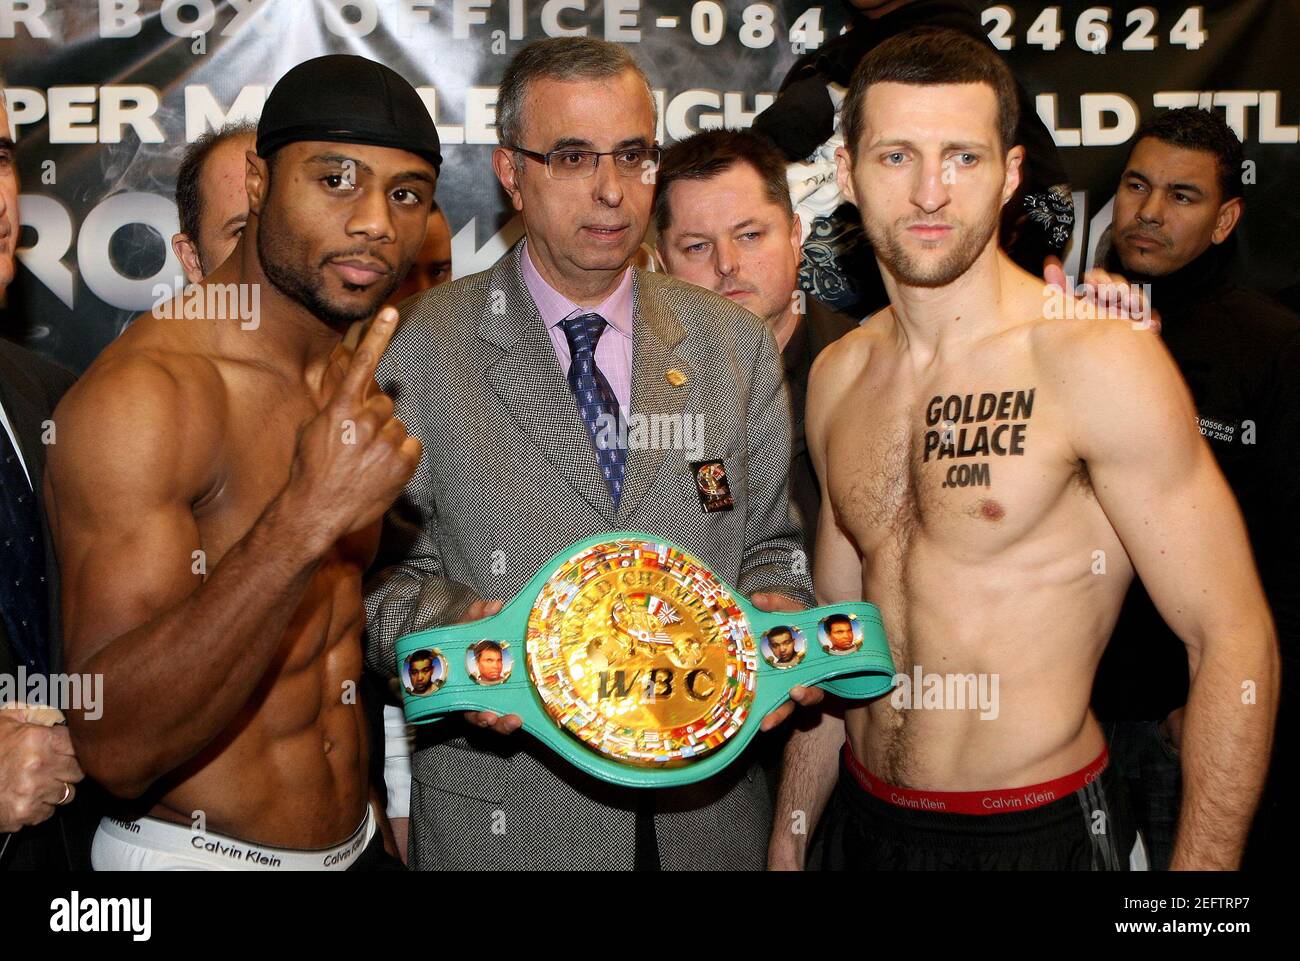 Boxing - Carl Froch & Jean Pascal Weigh-In - Victoria Shopping Centre, Nottingham, NG1 3QN - 5/12/08  Jean Pascal (L) and Carl Froch (R) during the Weigh In  Mandatory Credit: Action Images / Scott Heavey  Livepic Stock Photo